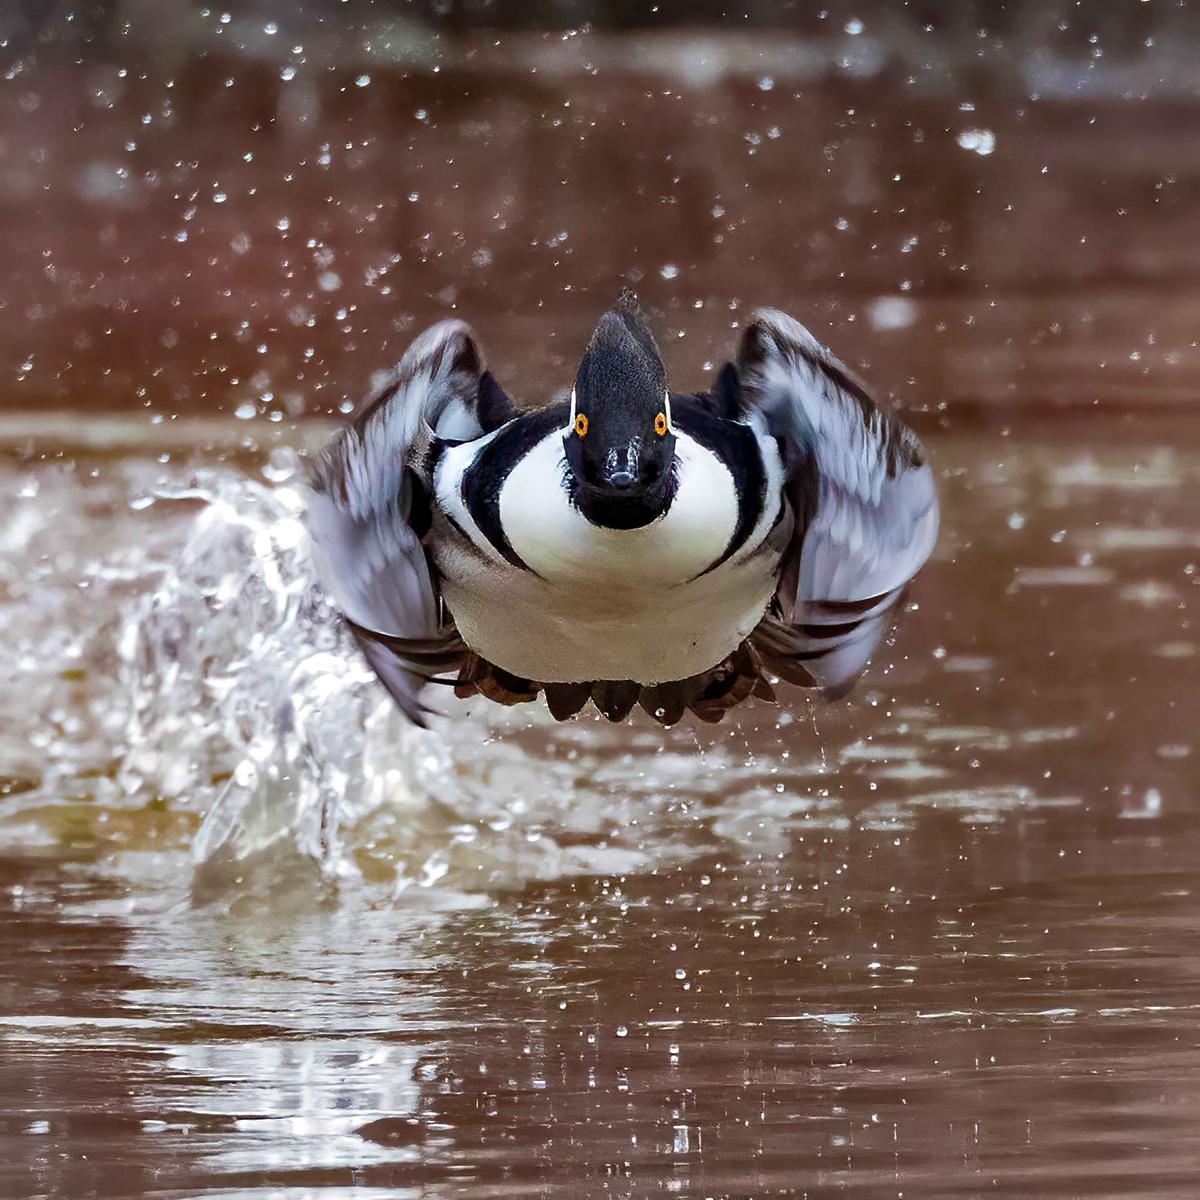 A male hooded merganser photographed by Charles Schmidt of the United States (Courtesy of Charles Schmidt/World Nature Photography Award)